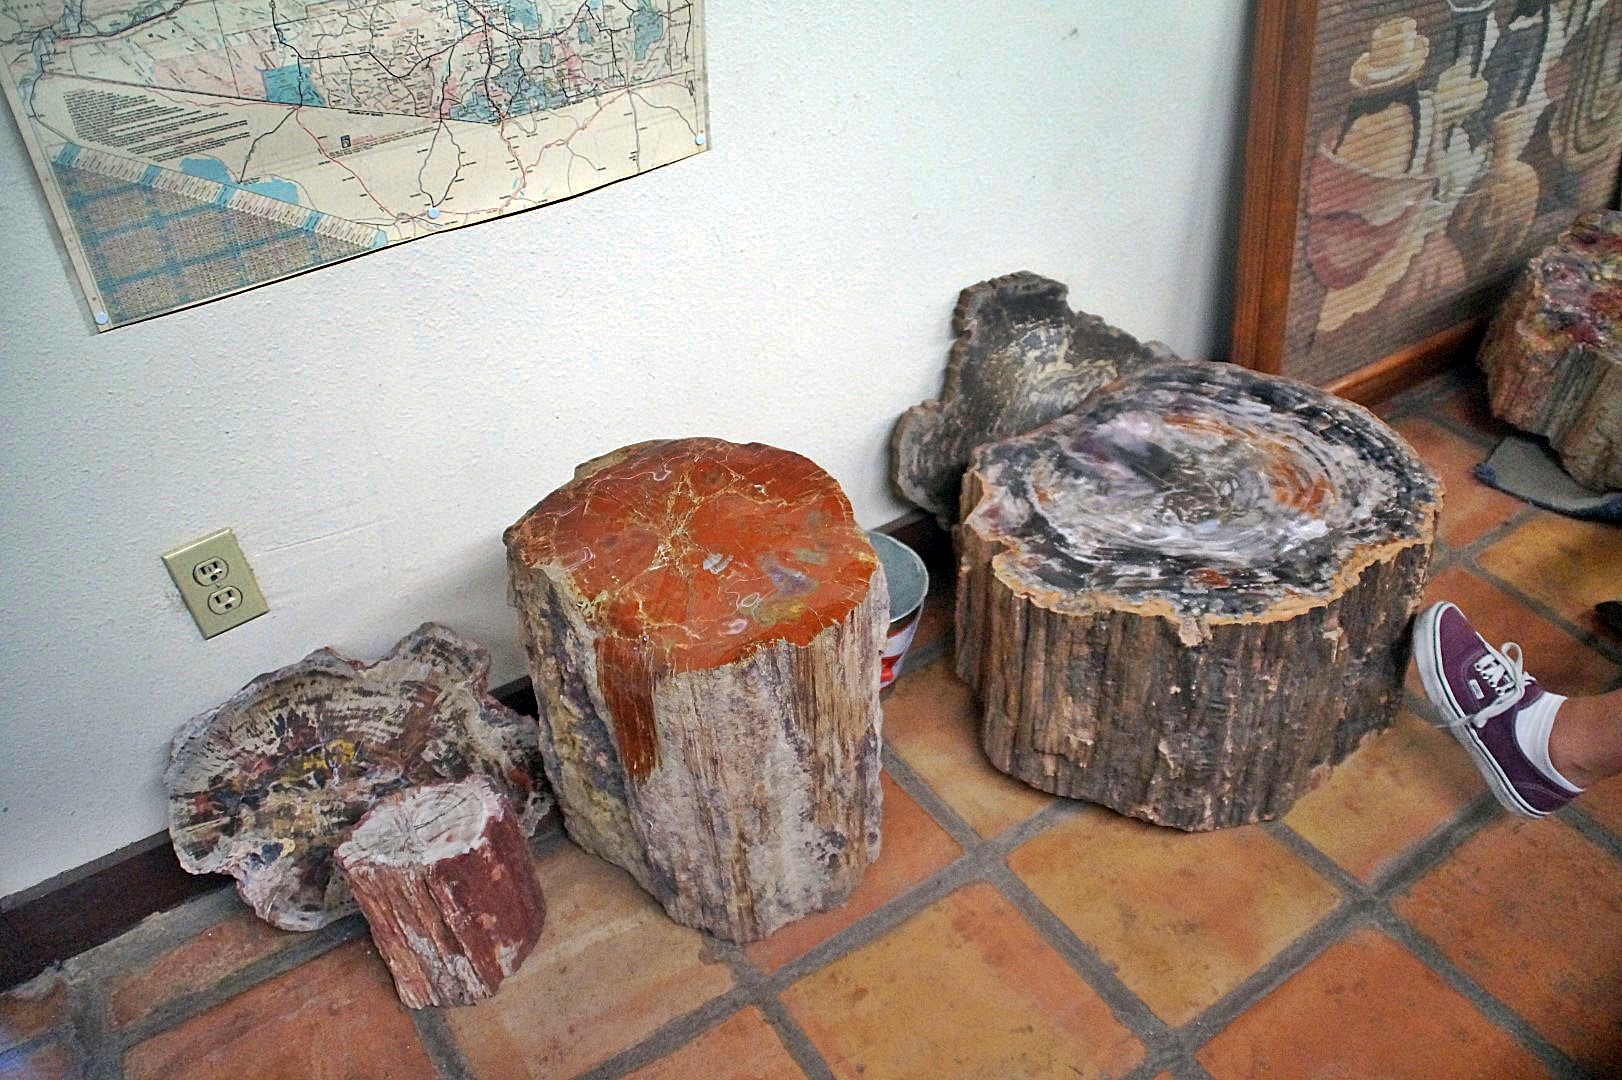 Petrified wood - this inspired us to go to the national park!